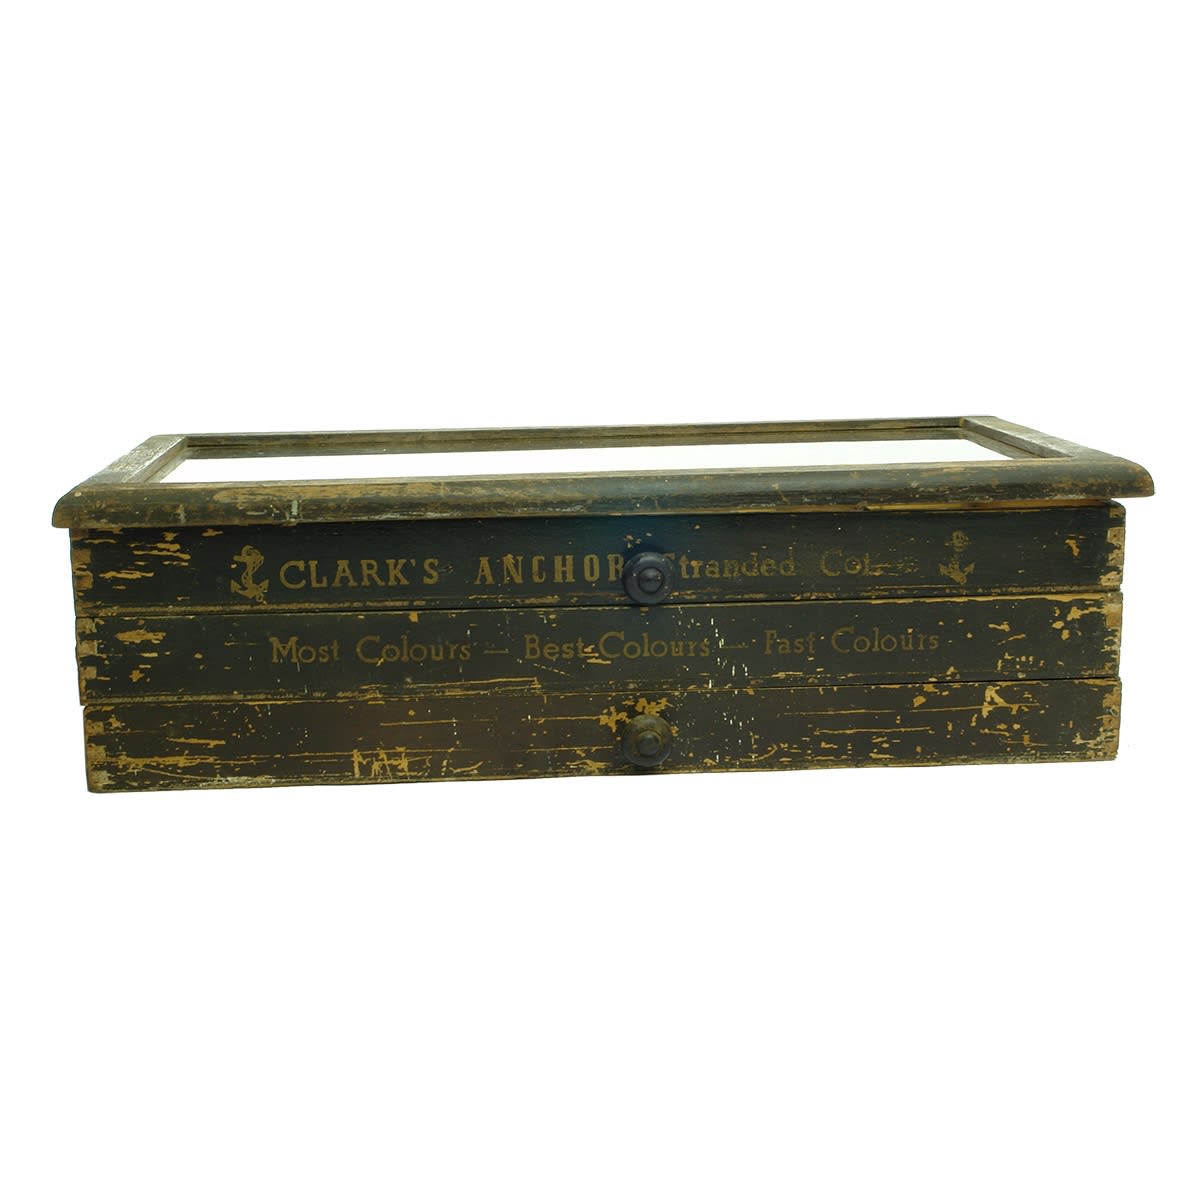 Miscellaneous. Clark's Anchor Stranded Cotton Expandable Wooden Carry Case with Glass Lid.